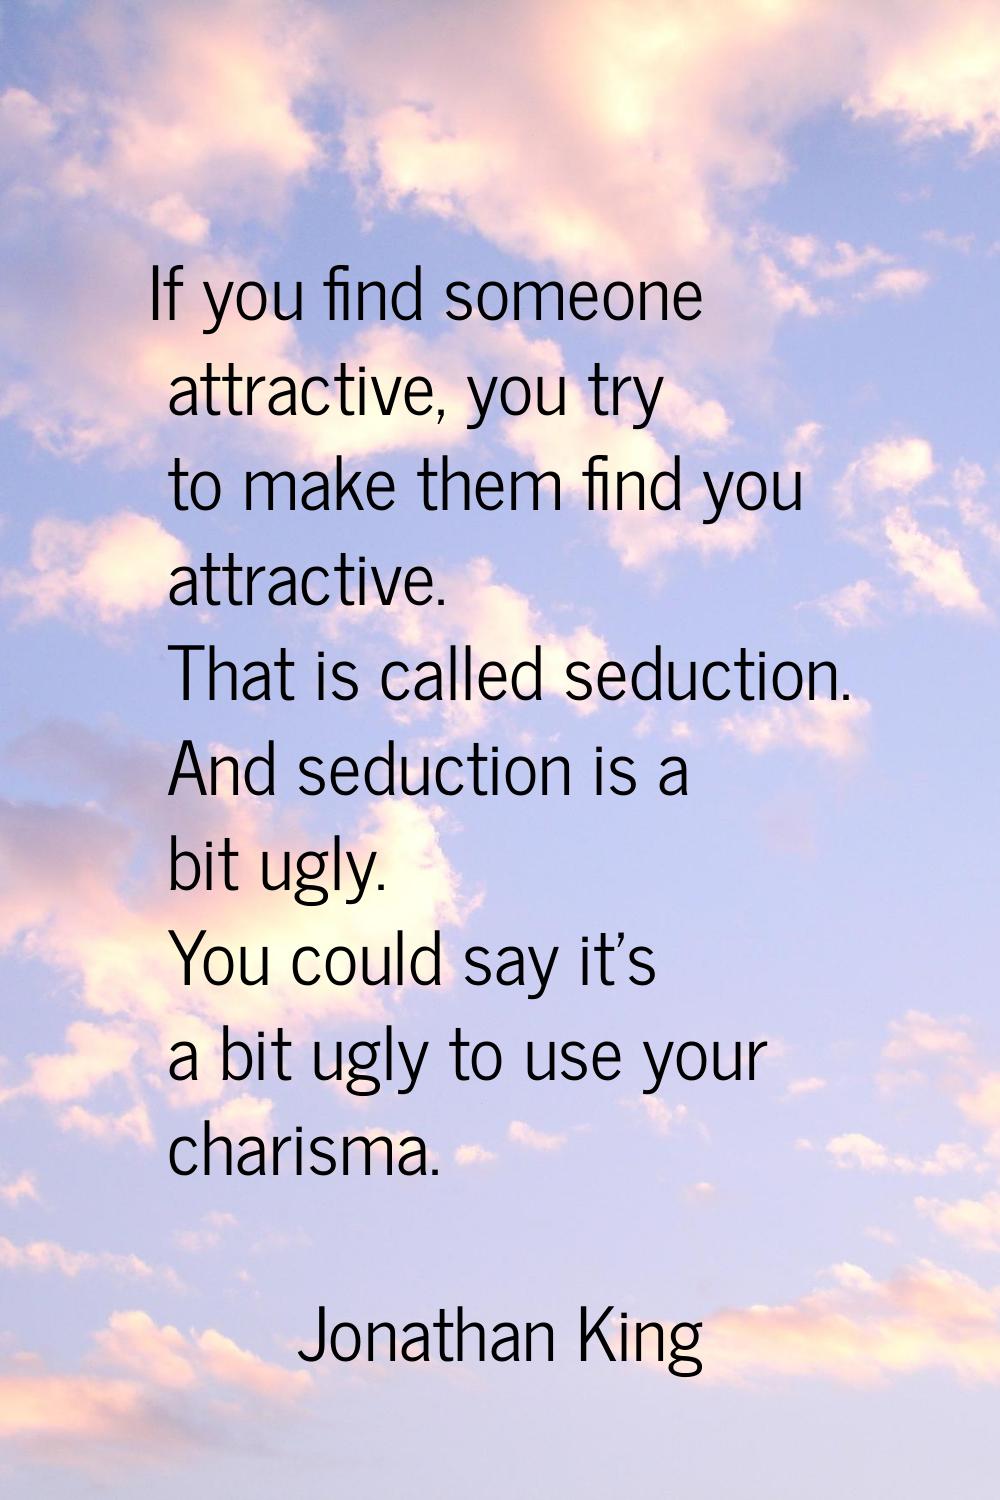 If you find someone attractive, you try to make them find you attractive. That is called seduction.